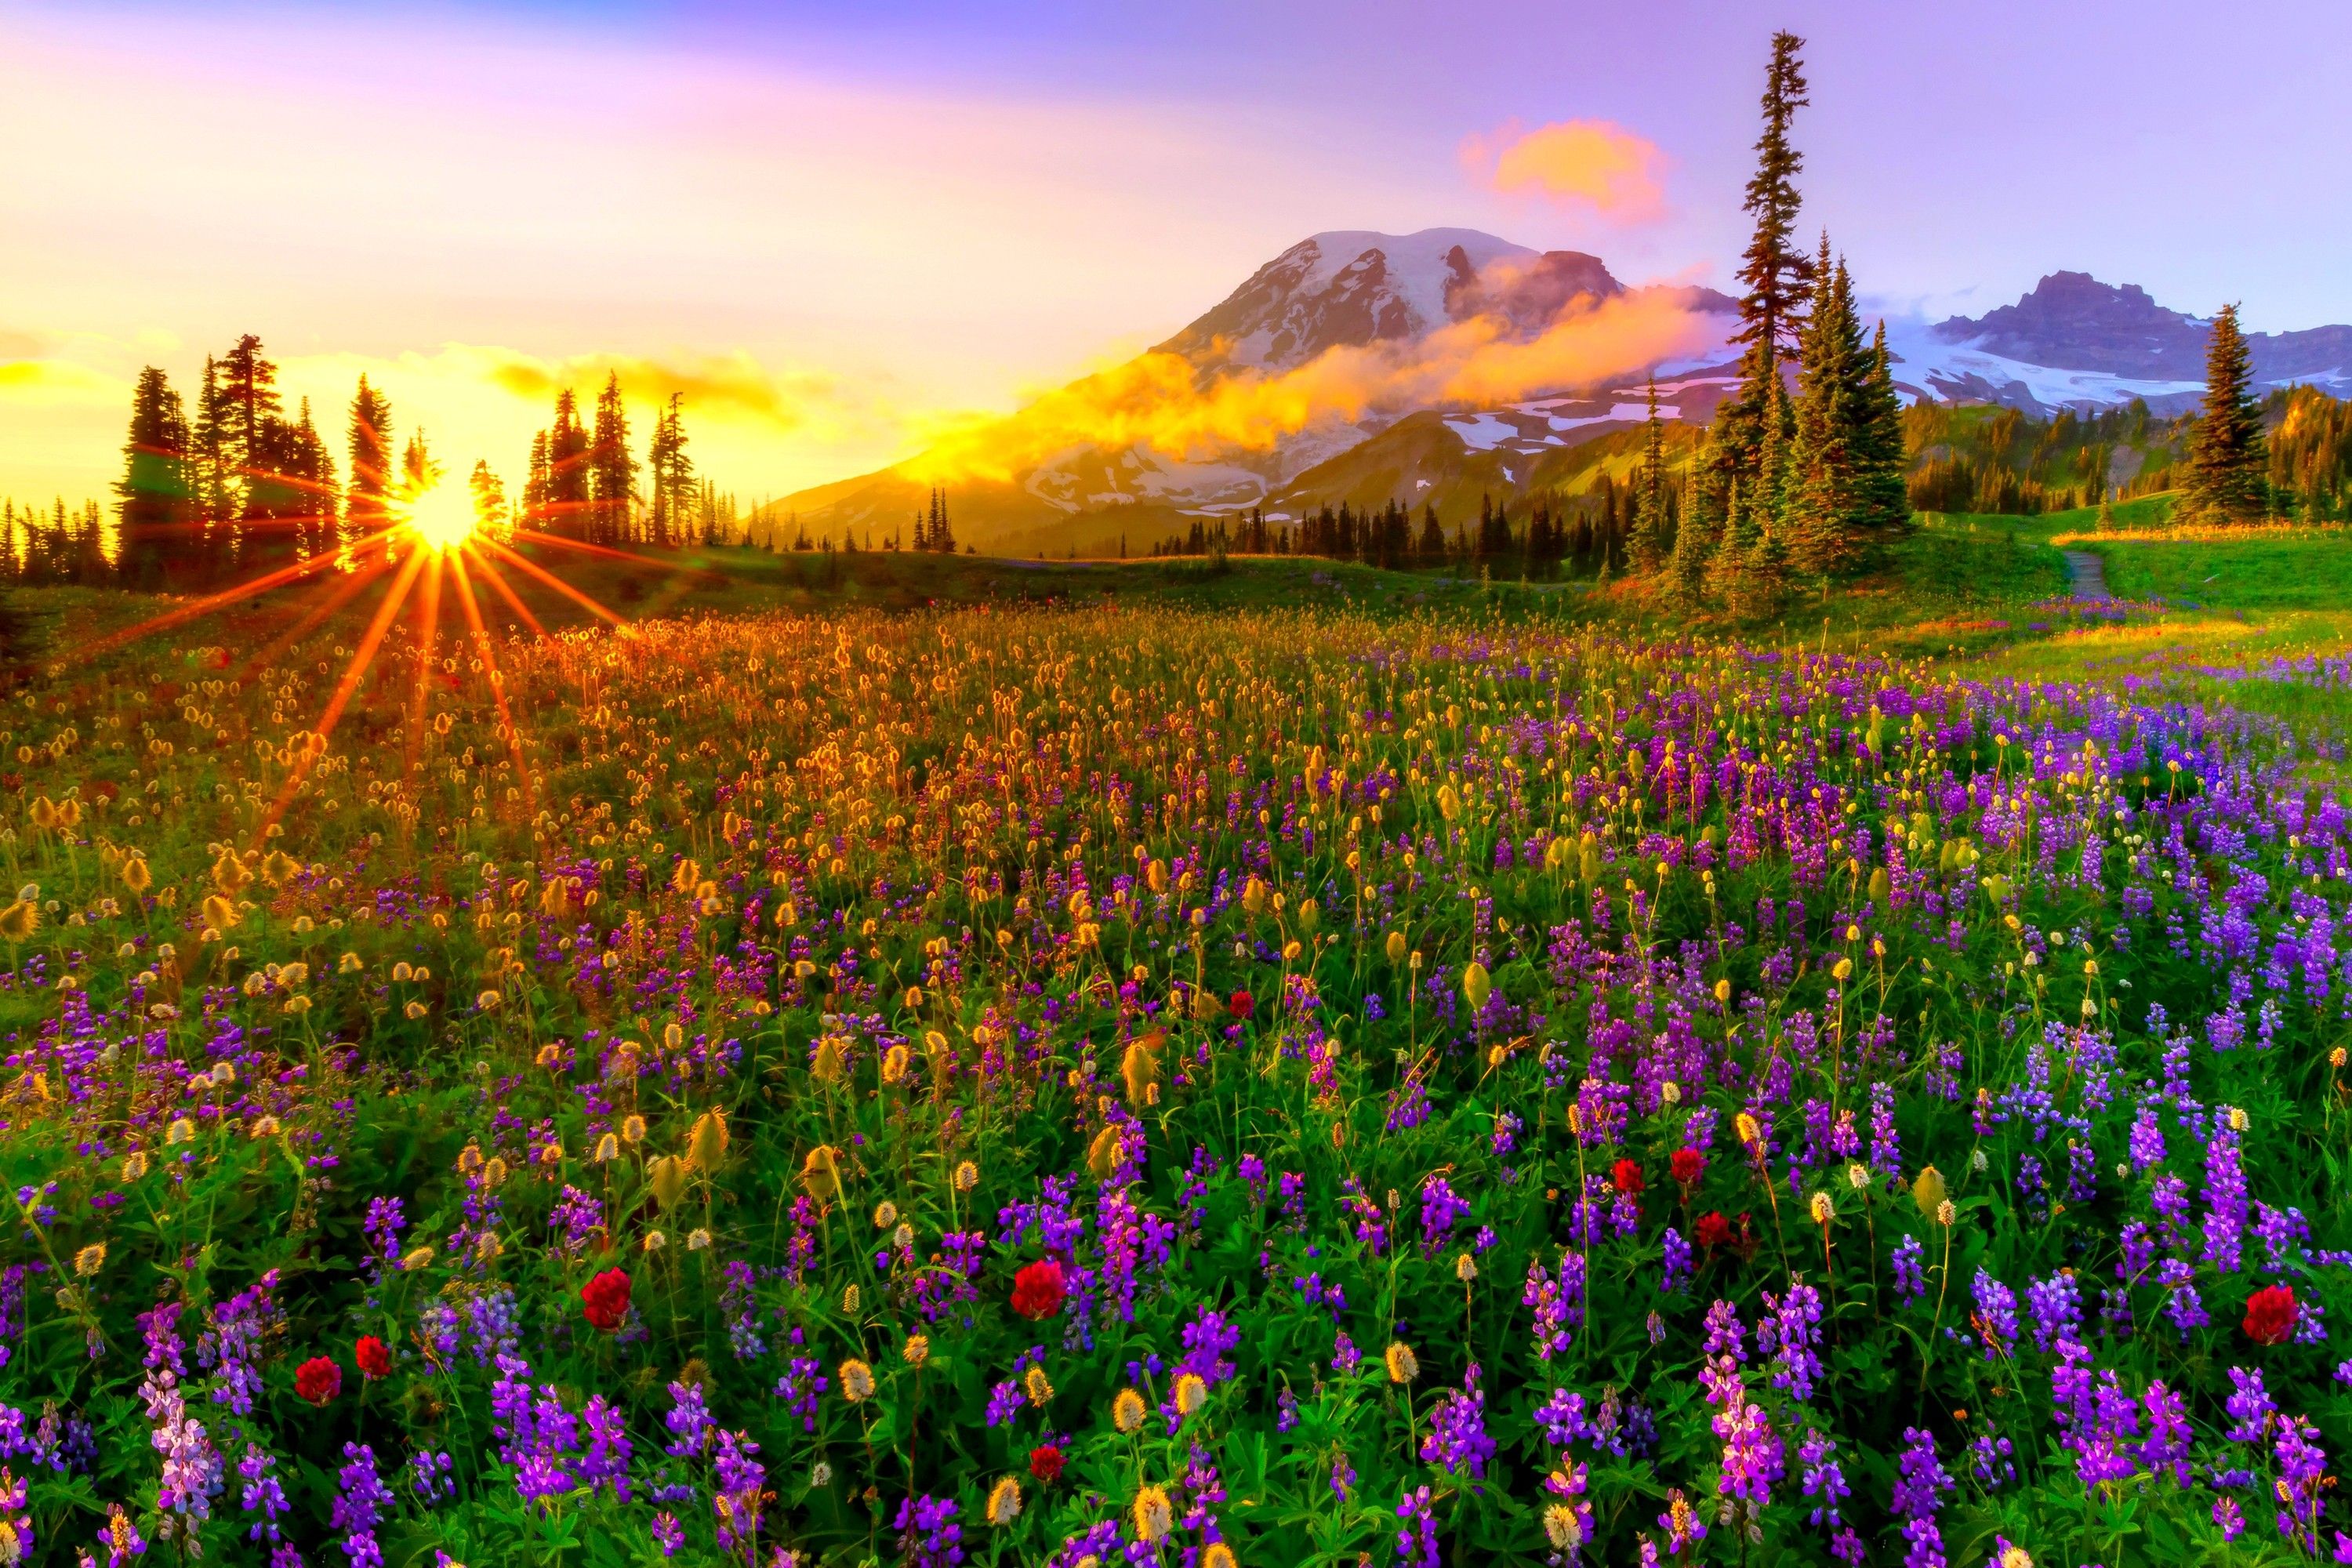 A field of purple and red flowers with a mountain in the background - Spring